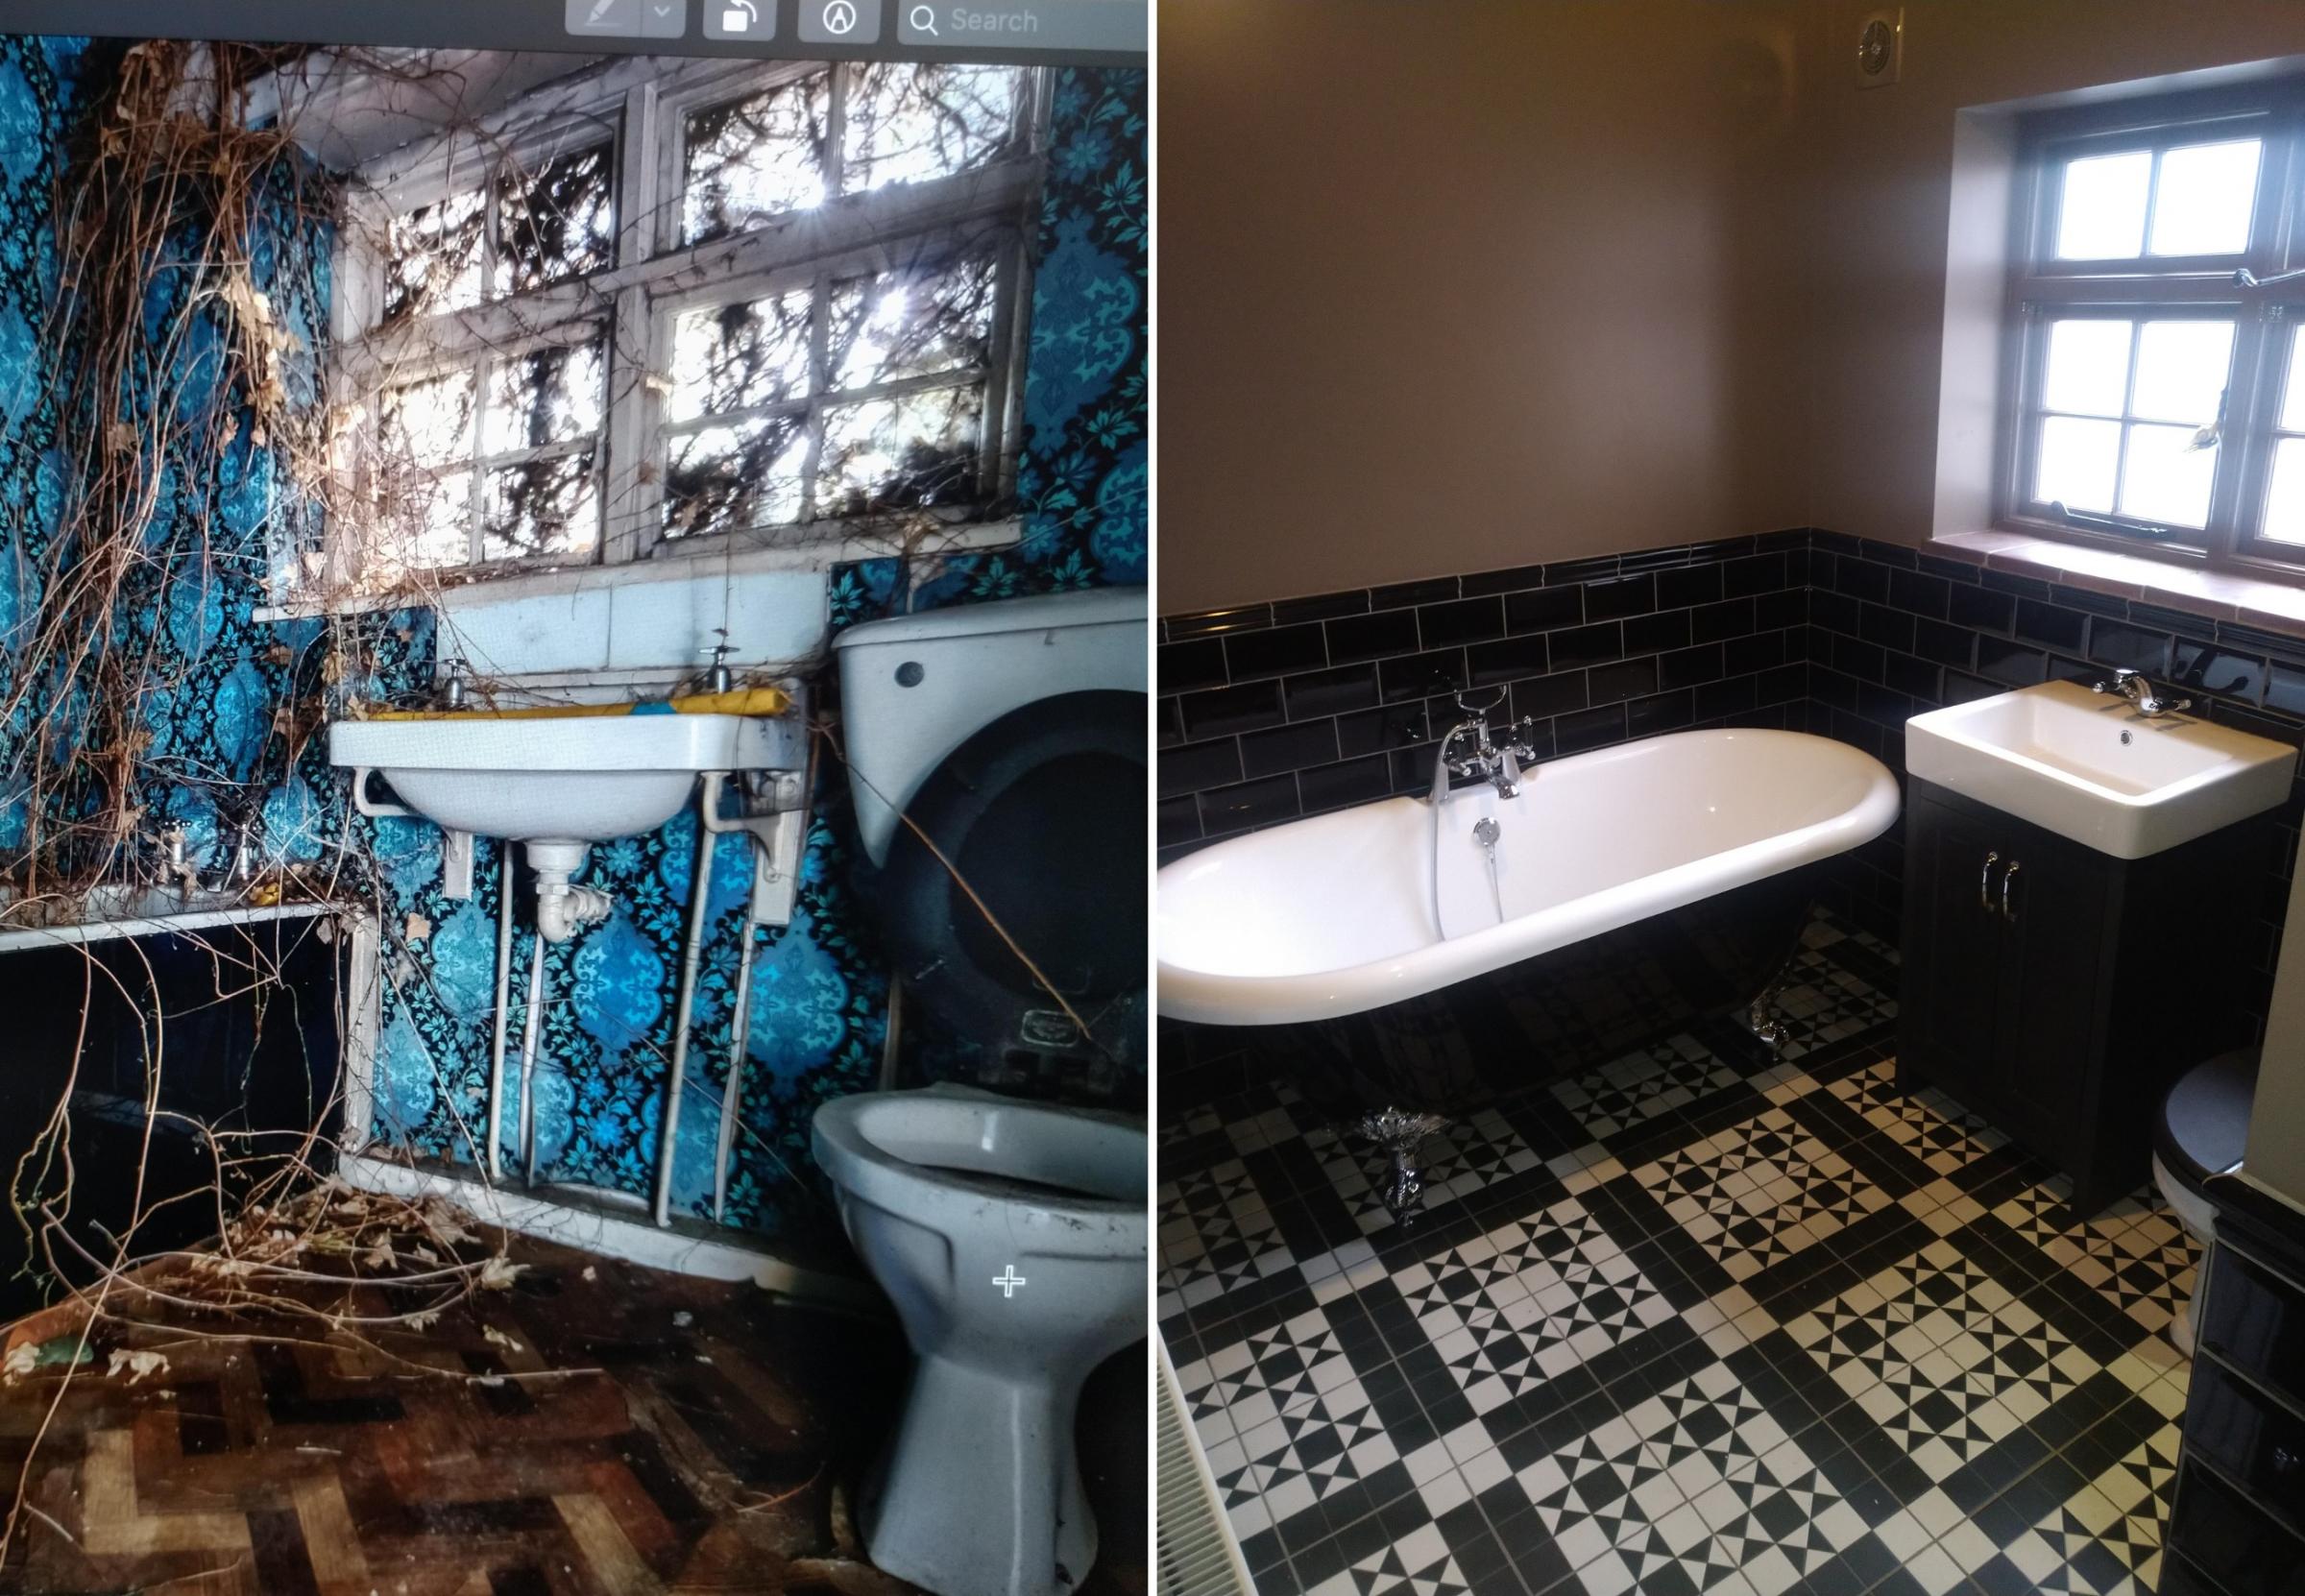 How the bathroom looked before and after